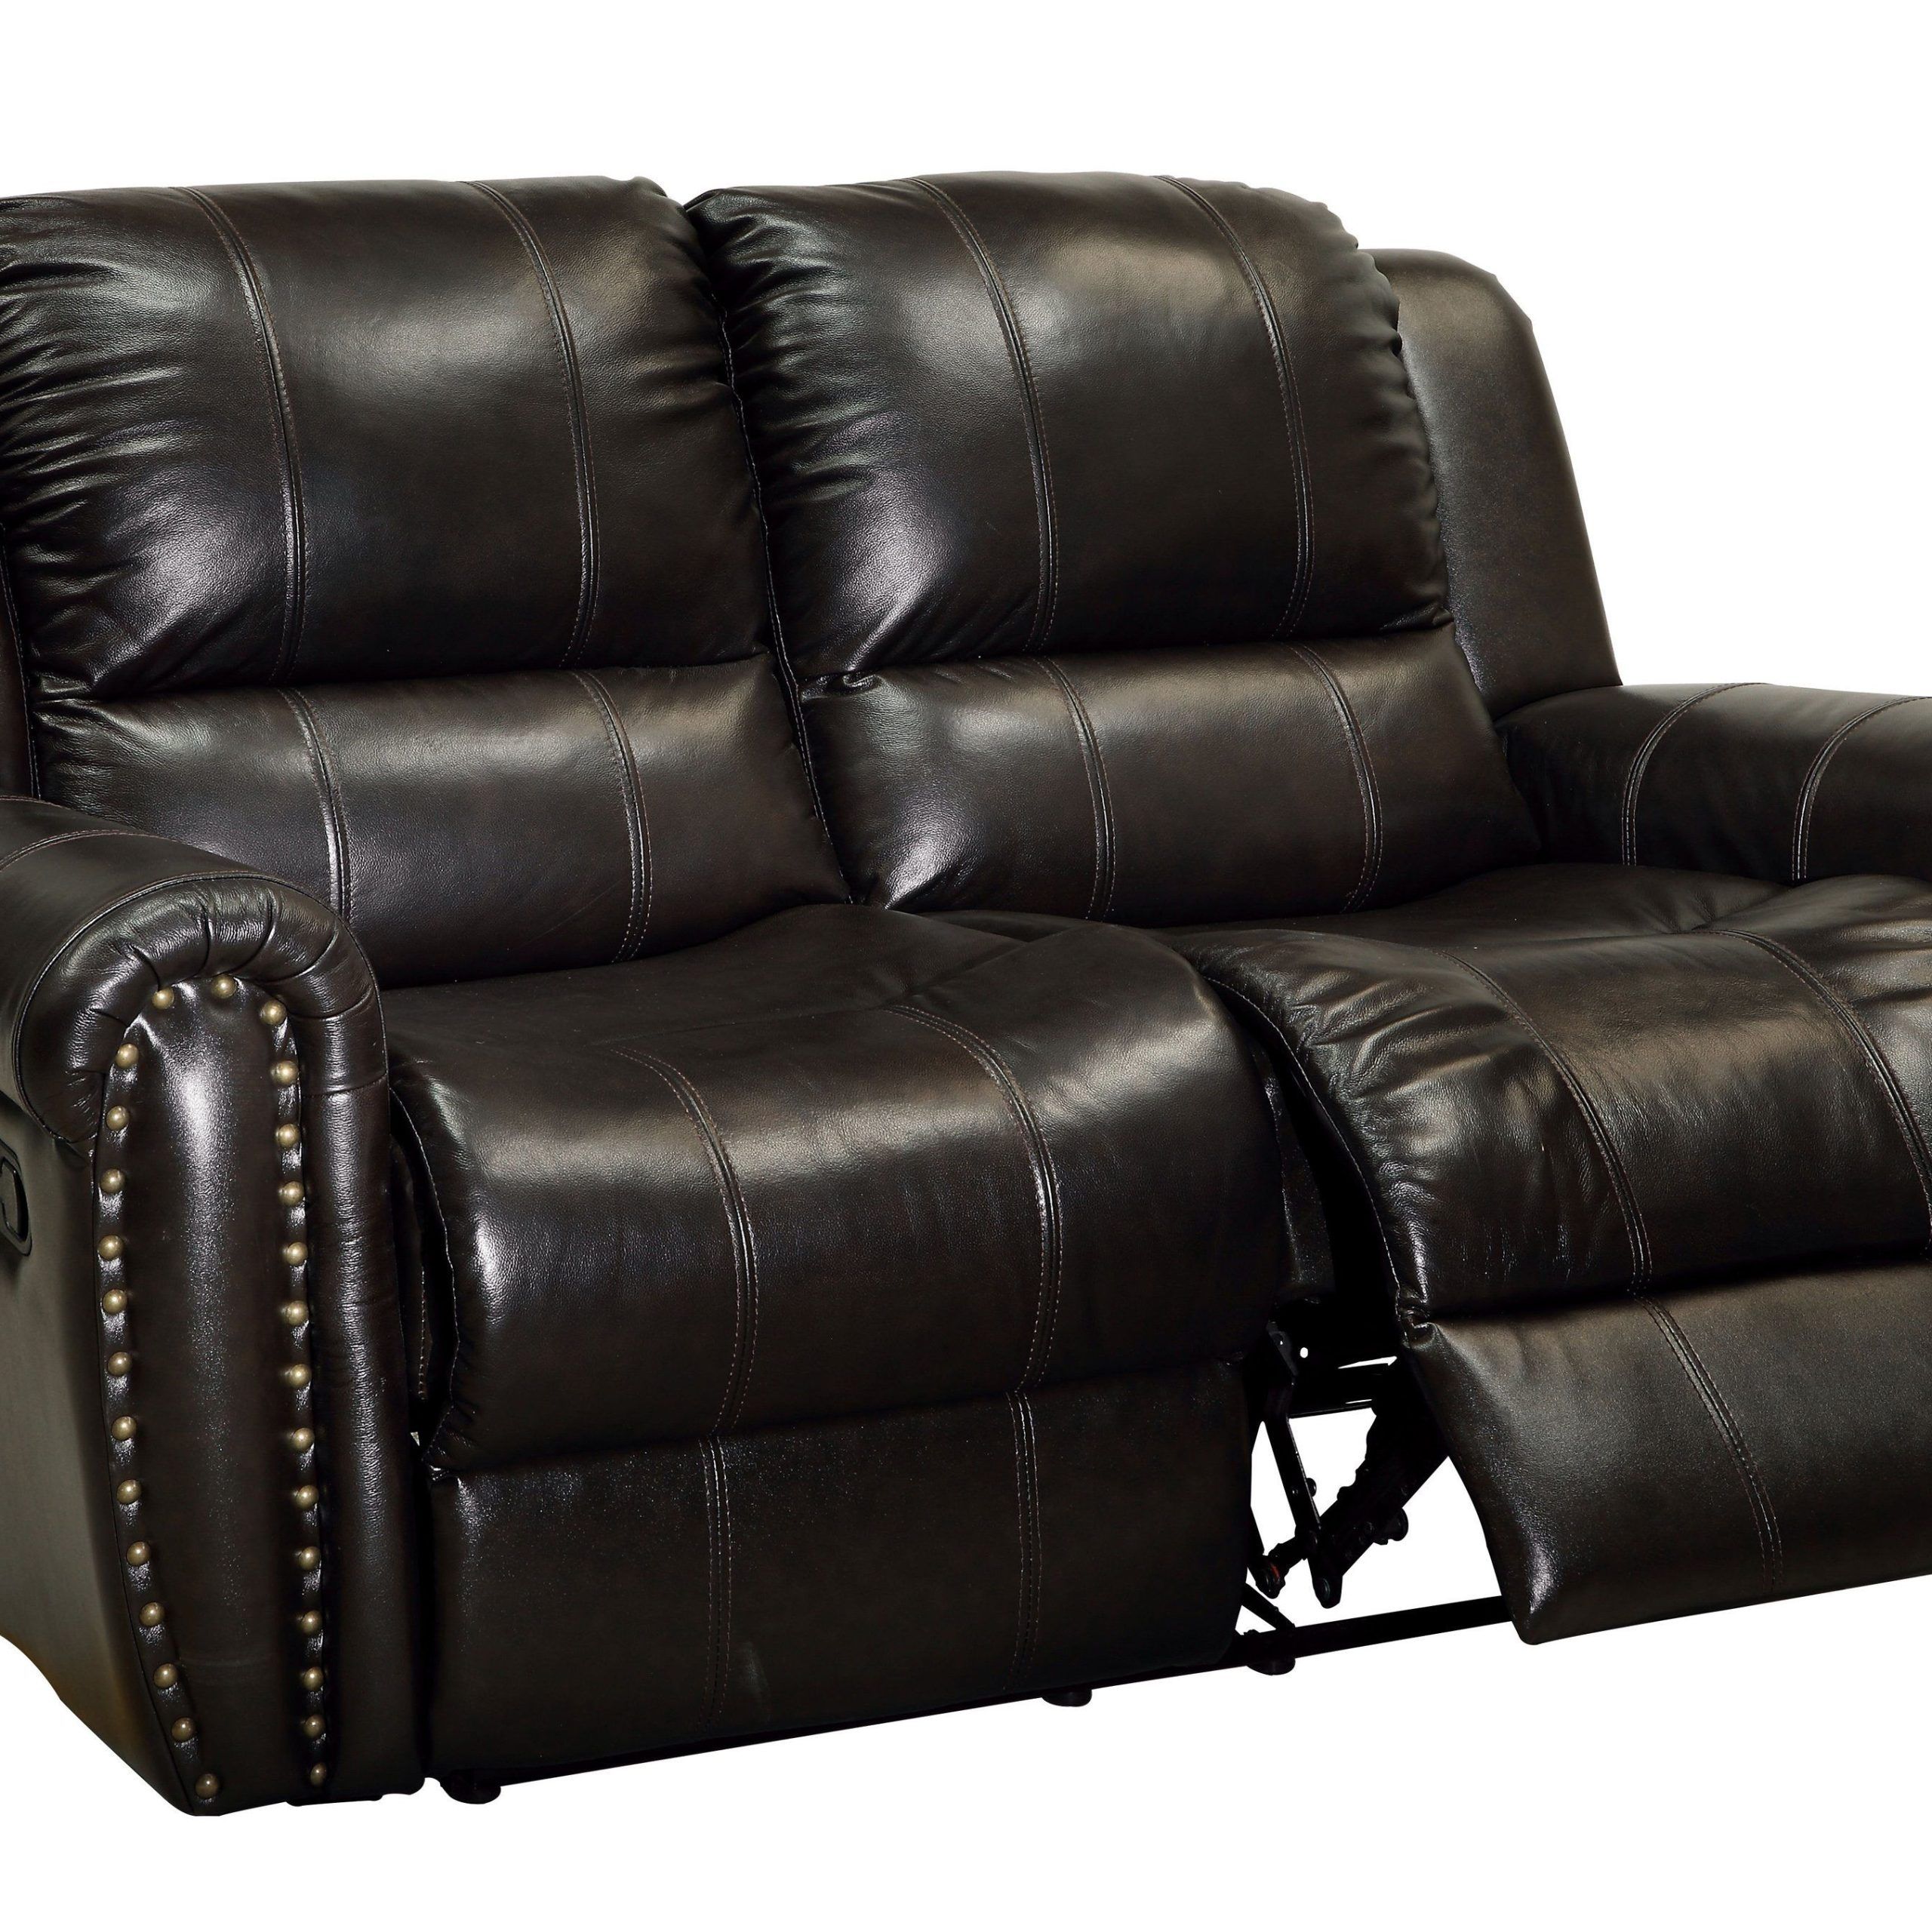 Hennigan Transitional Top Grain Leather Match Reclining Loveseat In For Top Grain Leather Loveseats (View 12 of 20)